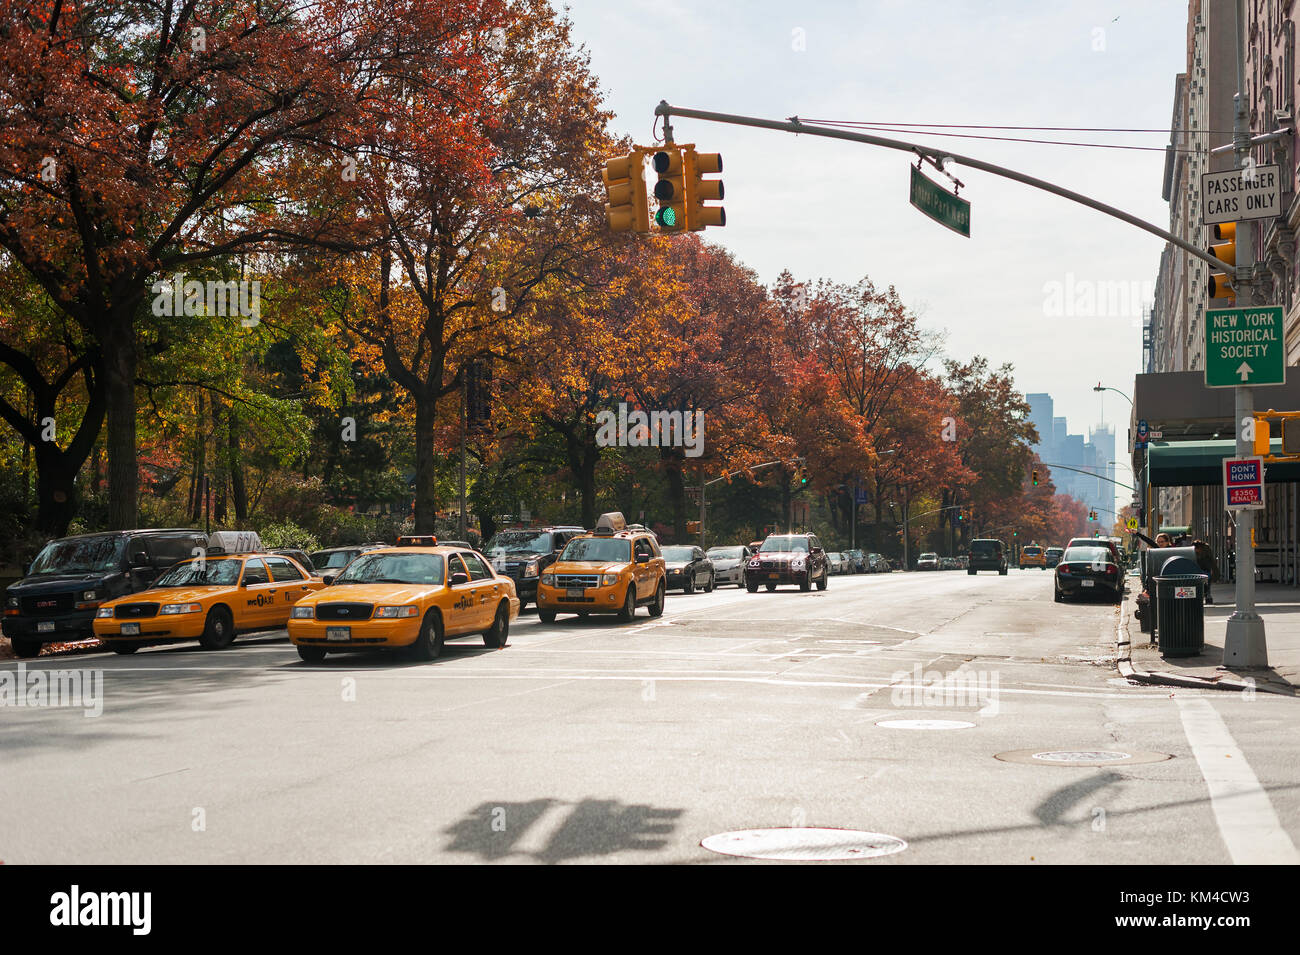 New York City, USA - Nov 14, 2011 : Yellow taxis in Central Park west in autumn. Stock Photo